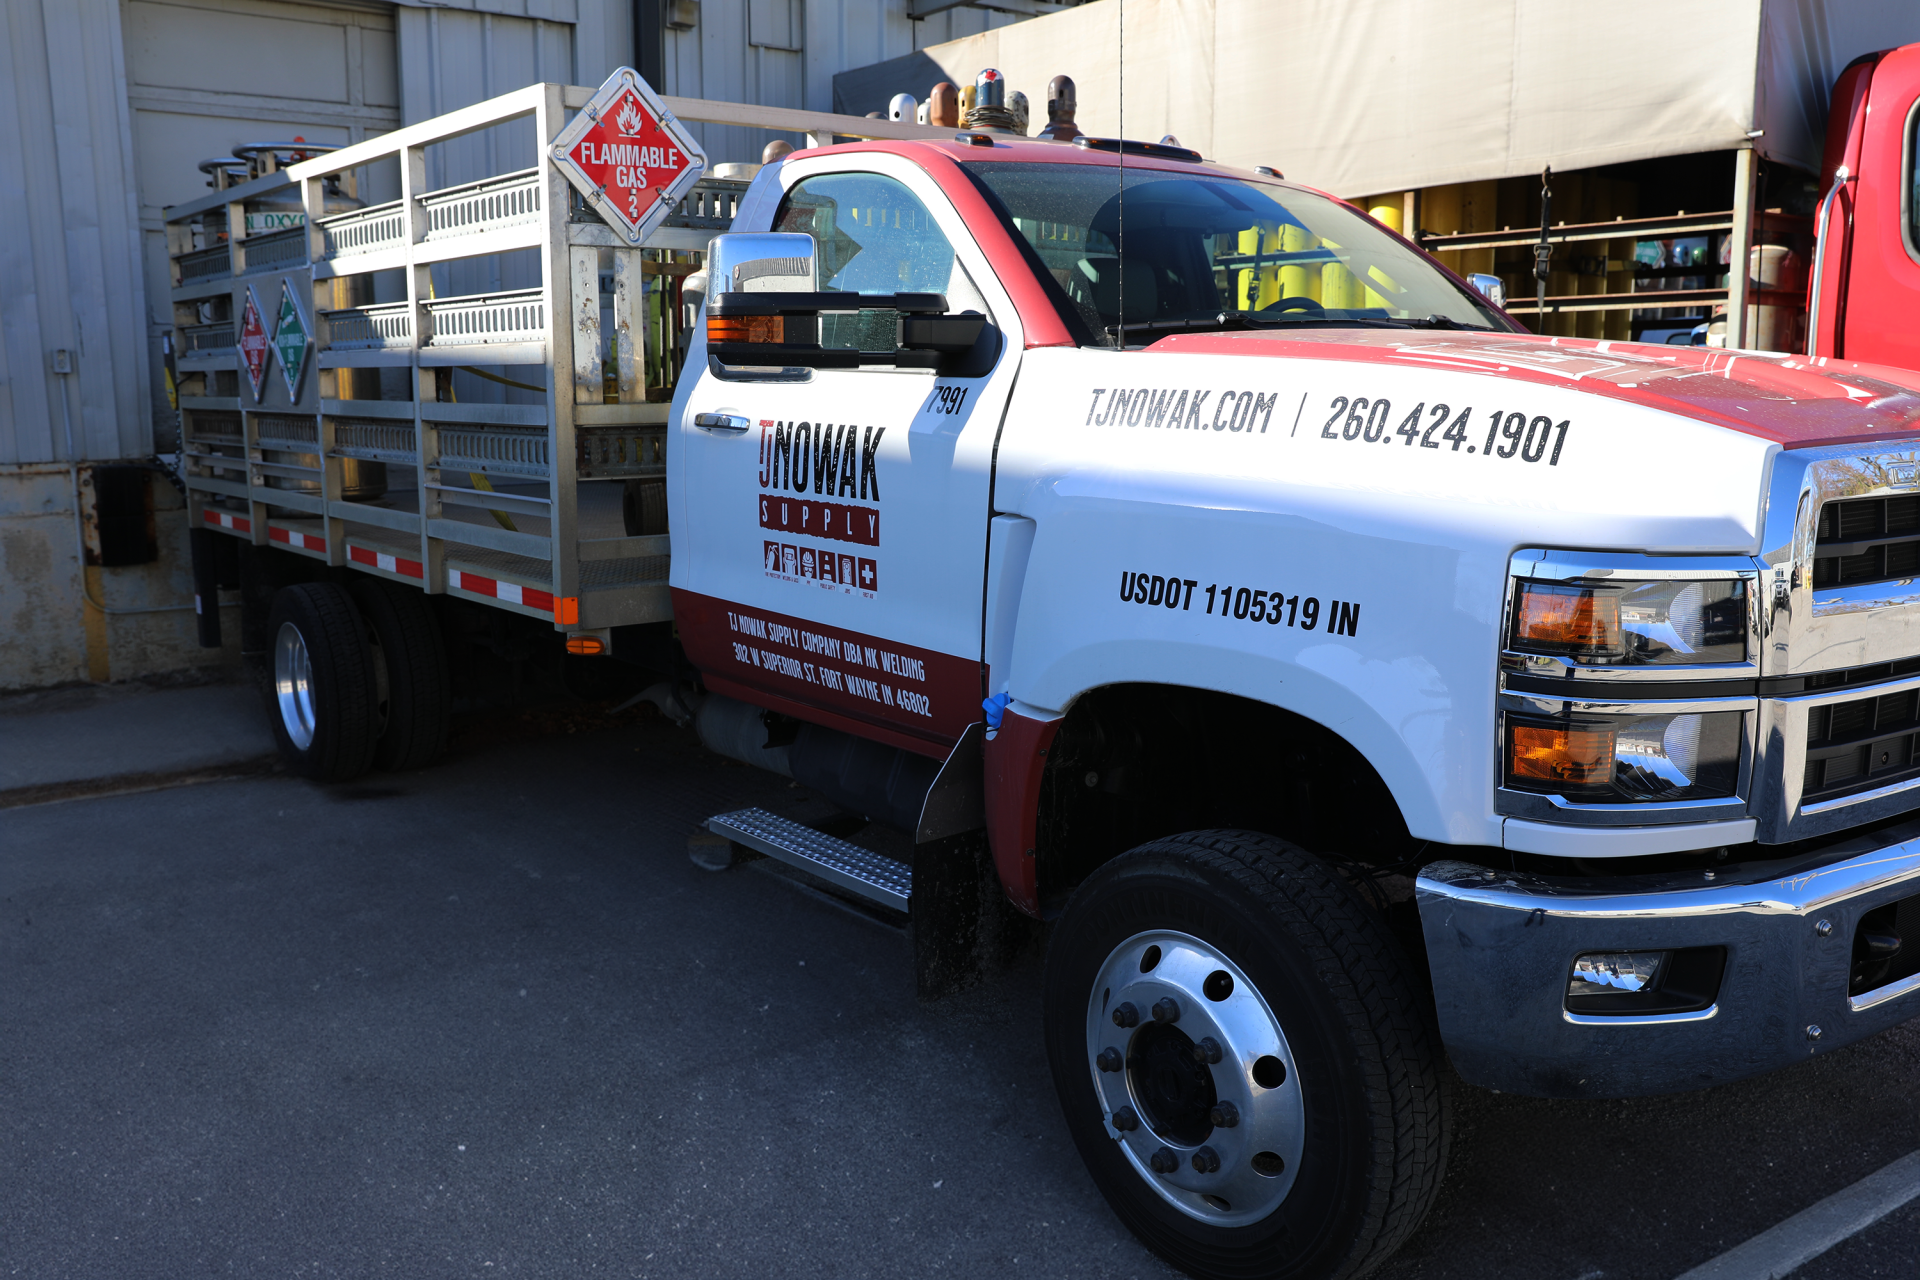 welding truck, gas delivery, vehicle, tj nowak supply